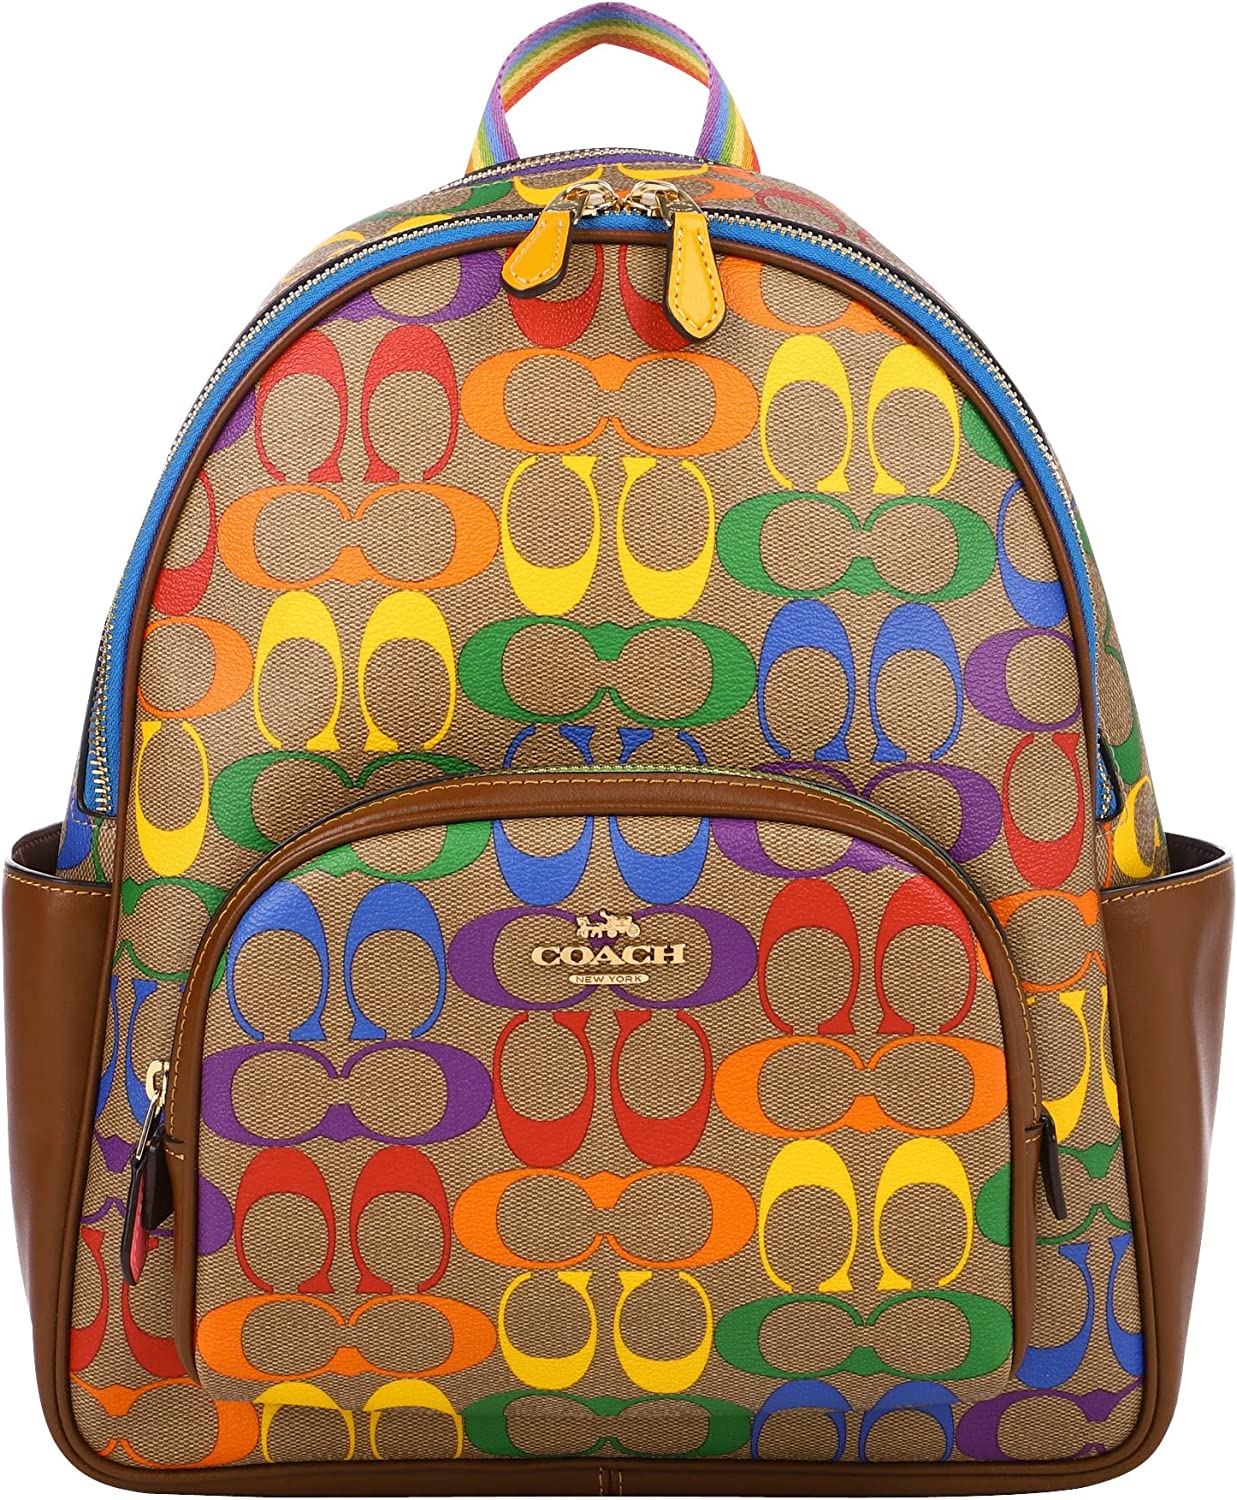 BALO NỮ COACH COURT BACKPACK IN RAINBOW SIGNATURE CANVAS CA140 11